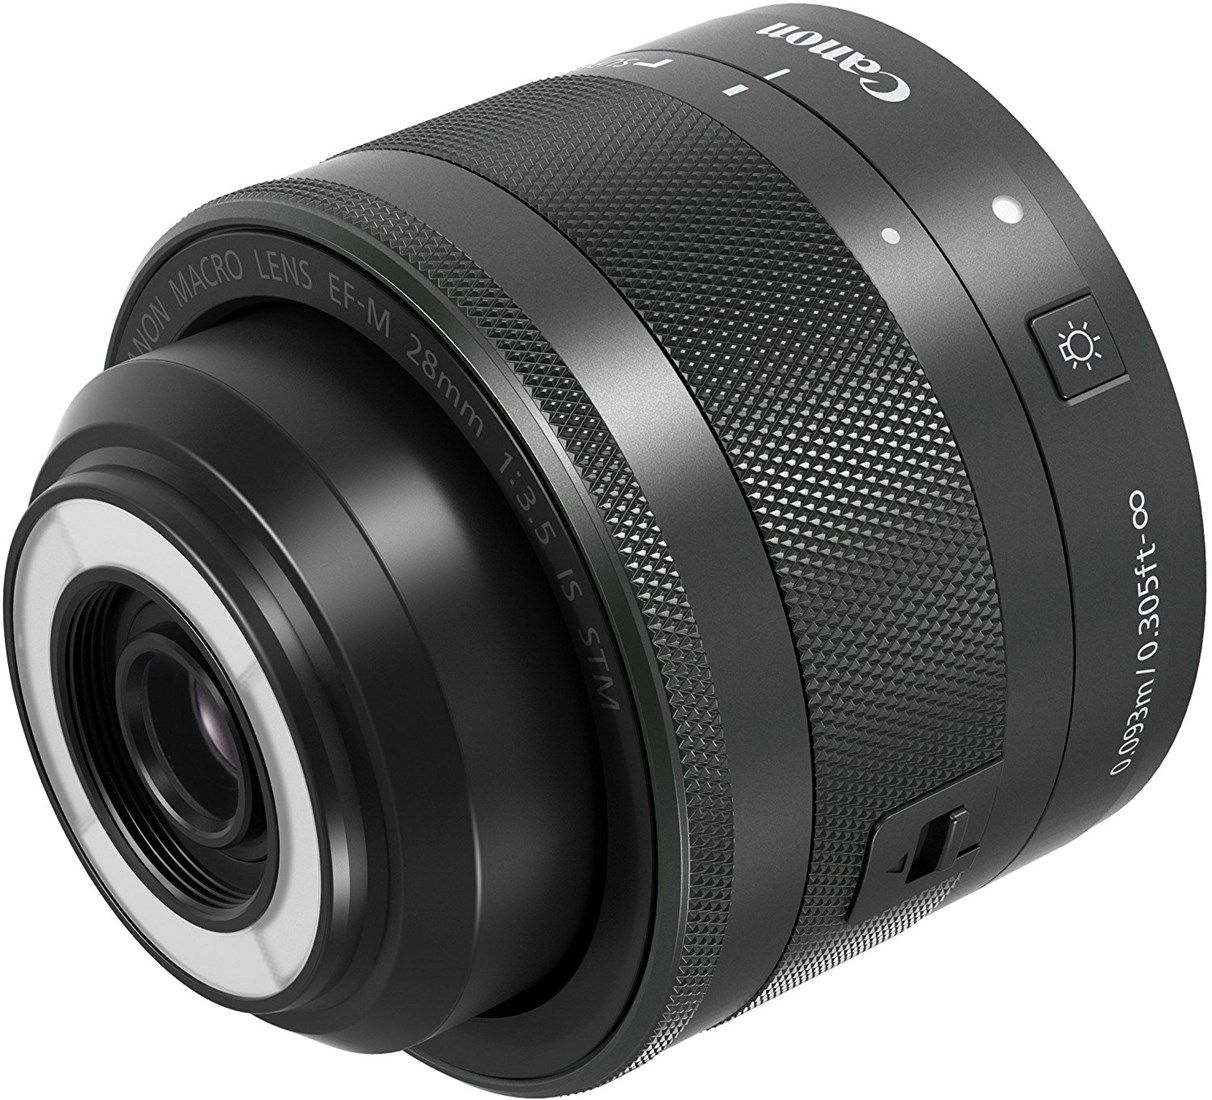 Canon EF-M 28mm f3.5 Macro IS STM Black Lens for EOS M - Product Photo 2 - Side view with emphasis on the focus ring and internal components